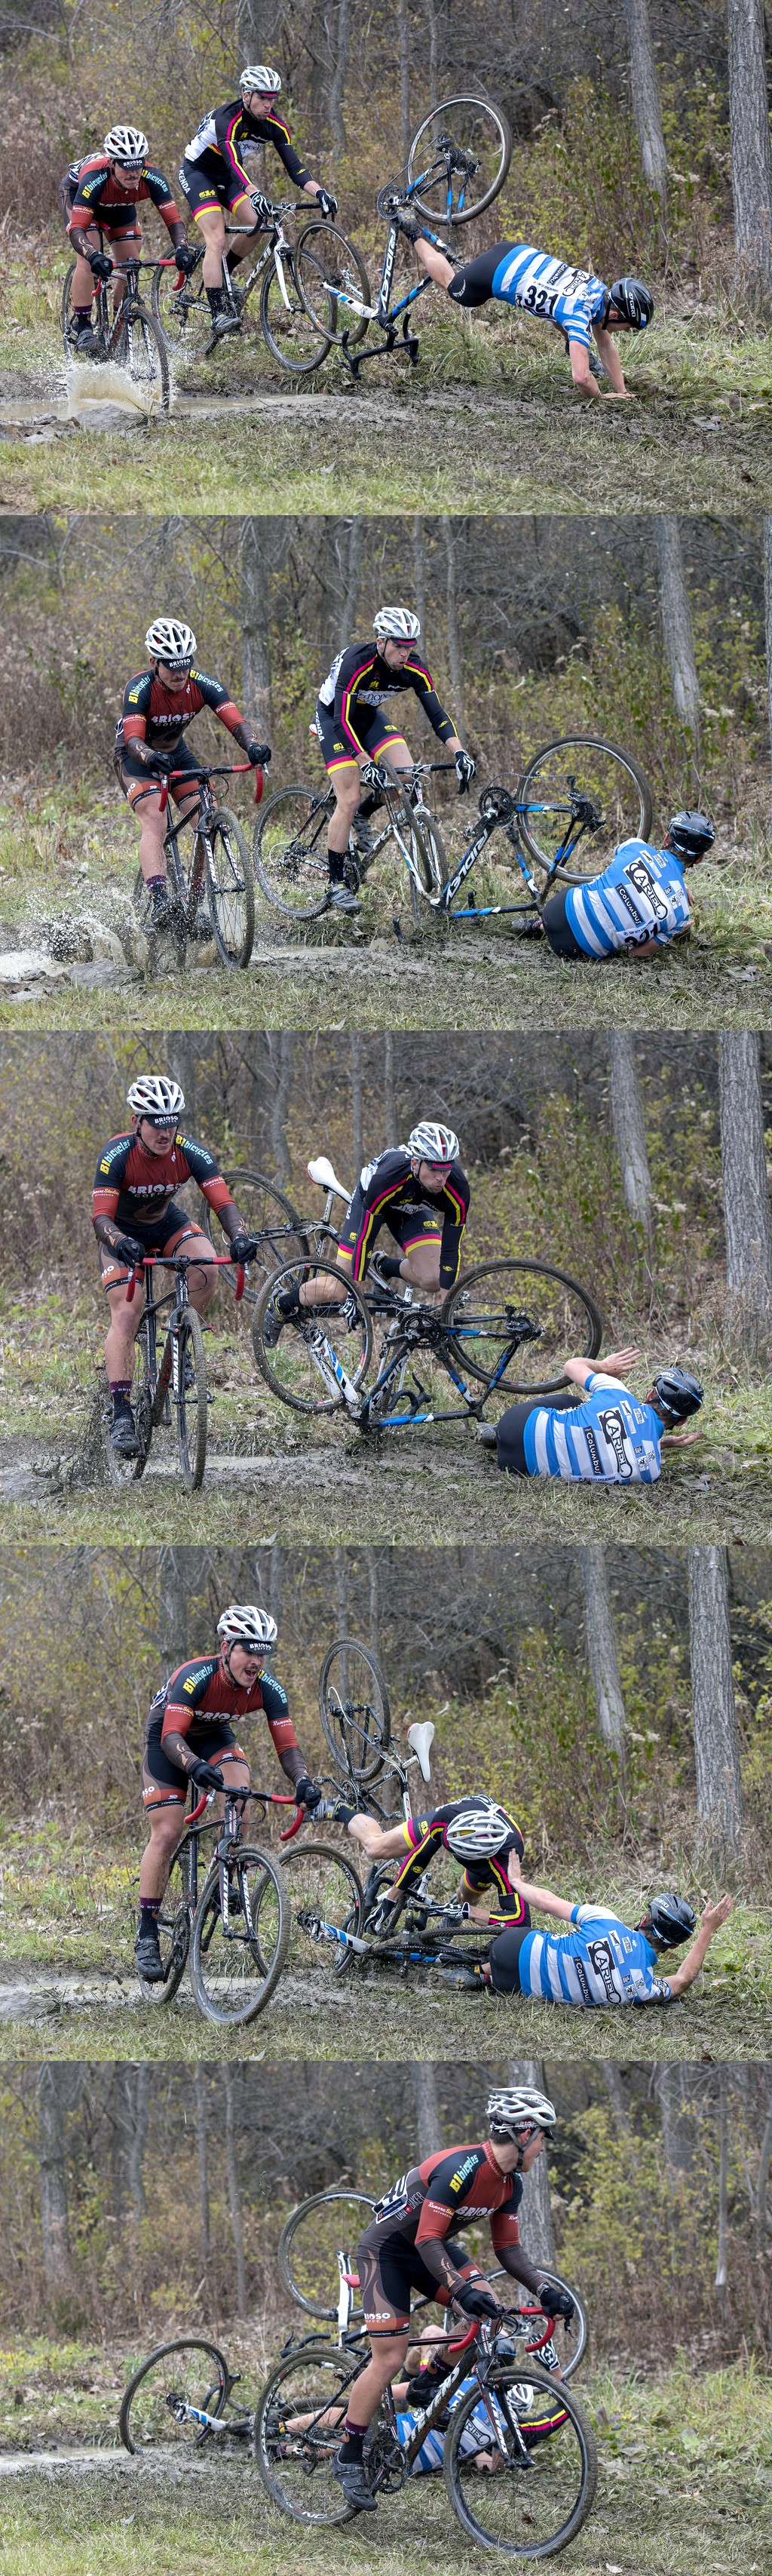 The mud rut didn't go so well for everybody... (Click to enlarge)